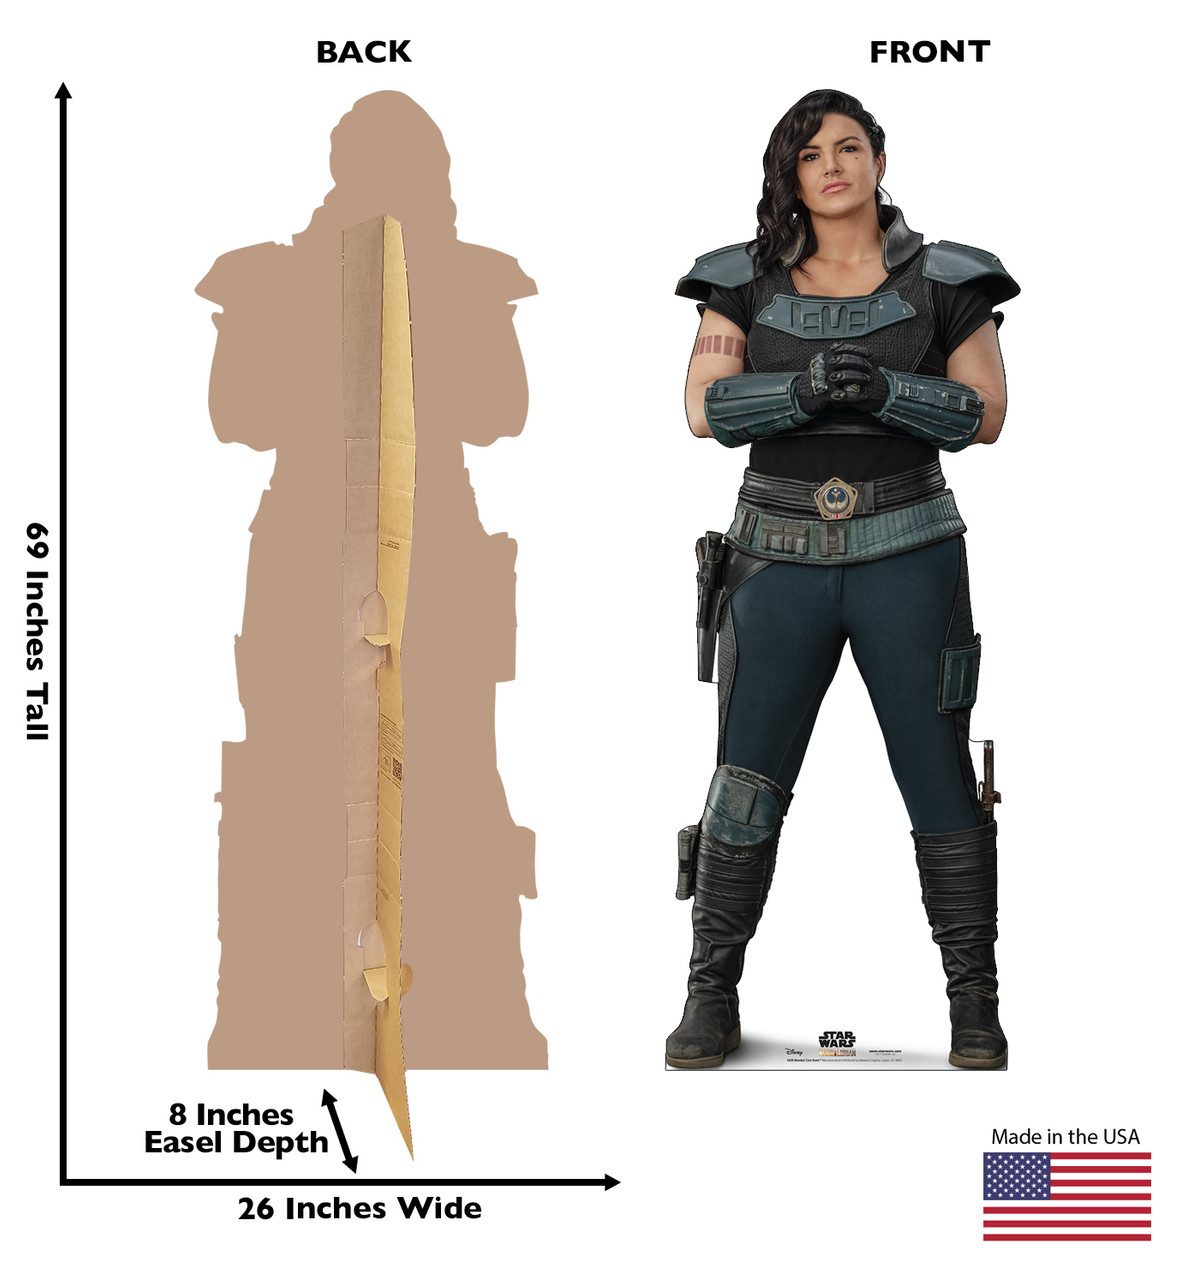 Life-size cardboard standee of Marshall Cara Dune  with back and front dimensions.